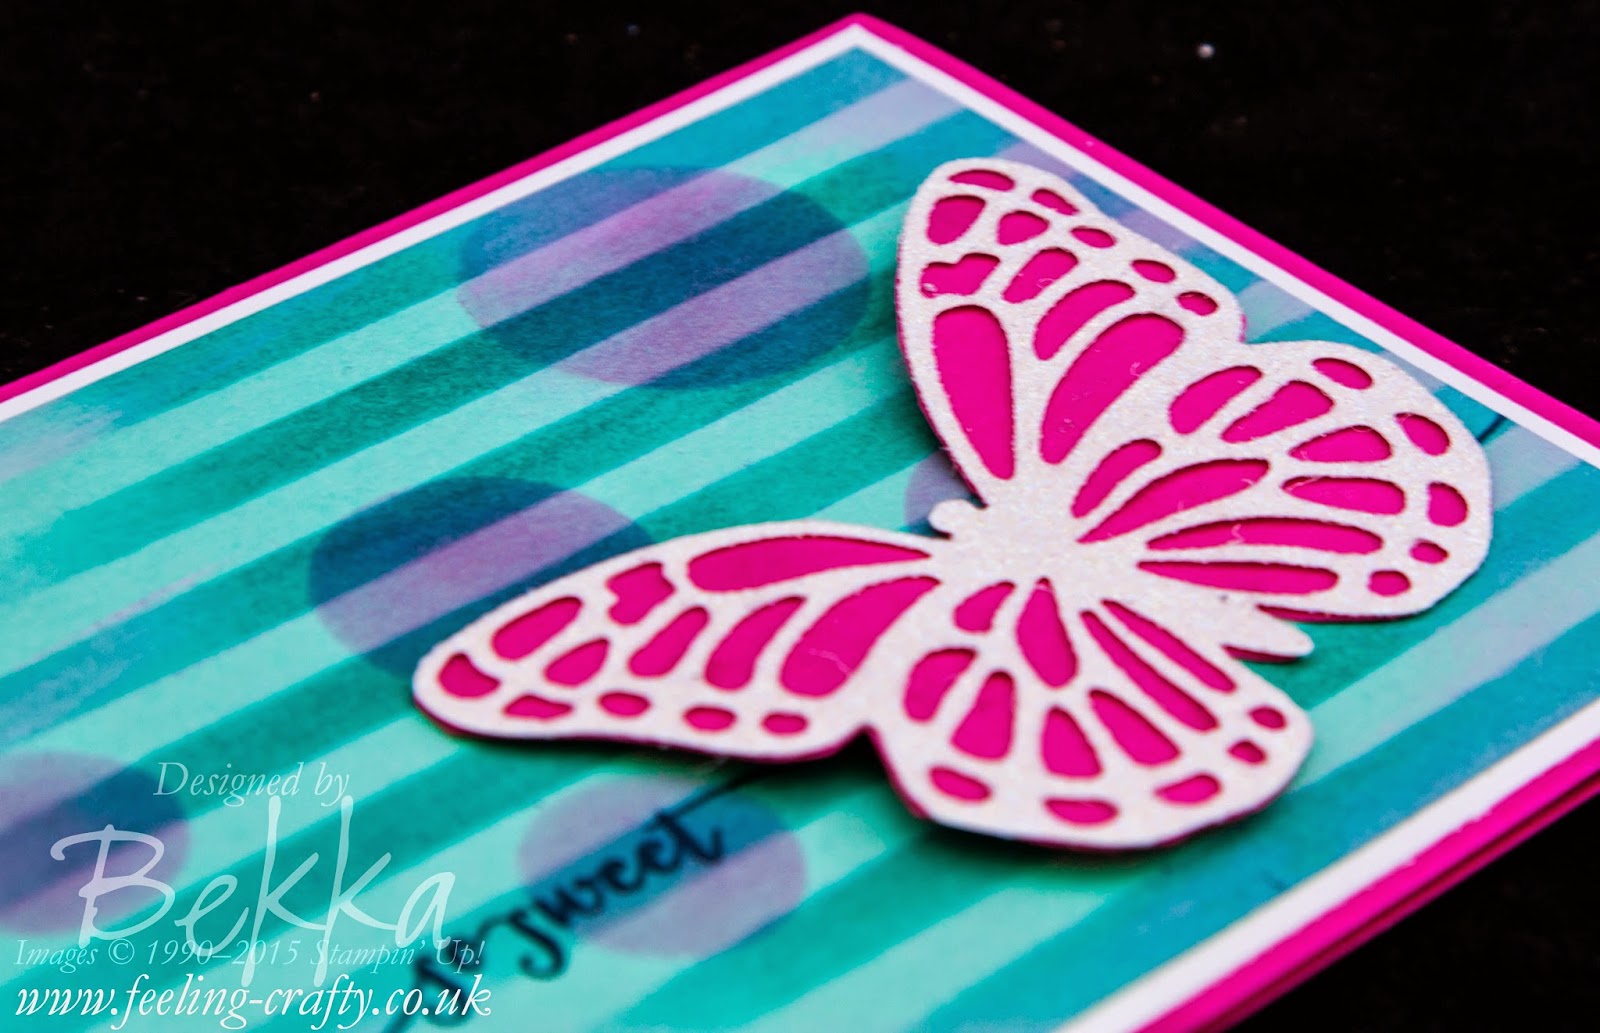 So Sweet Butterfly Card with a Stenciled Background by Stampin' Up! UK Independent Demonstrator Bekka - check her blog for lots of cute ideas